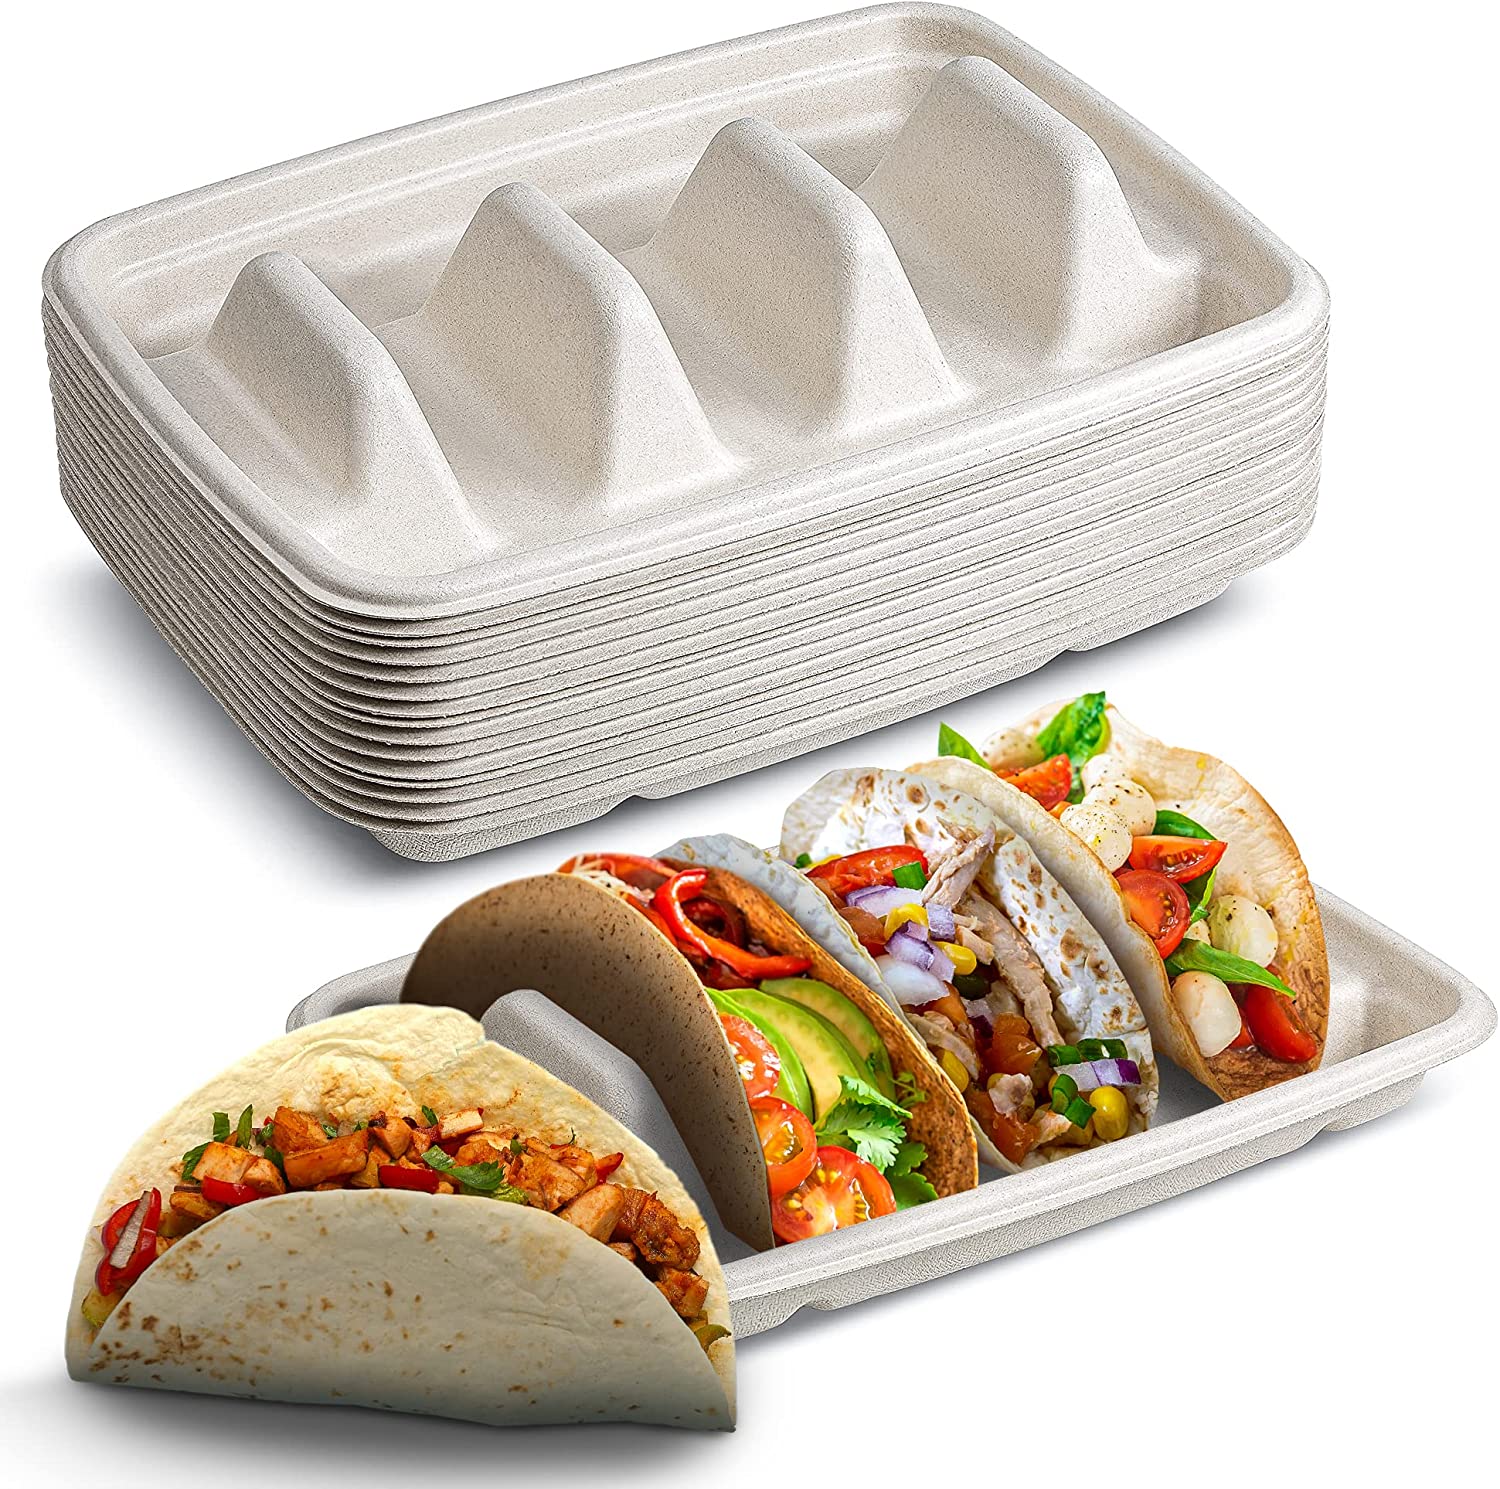  Takeout Plates